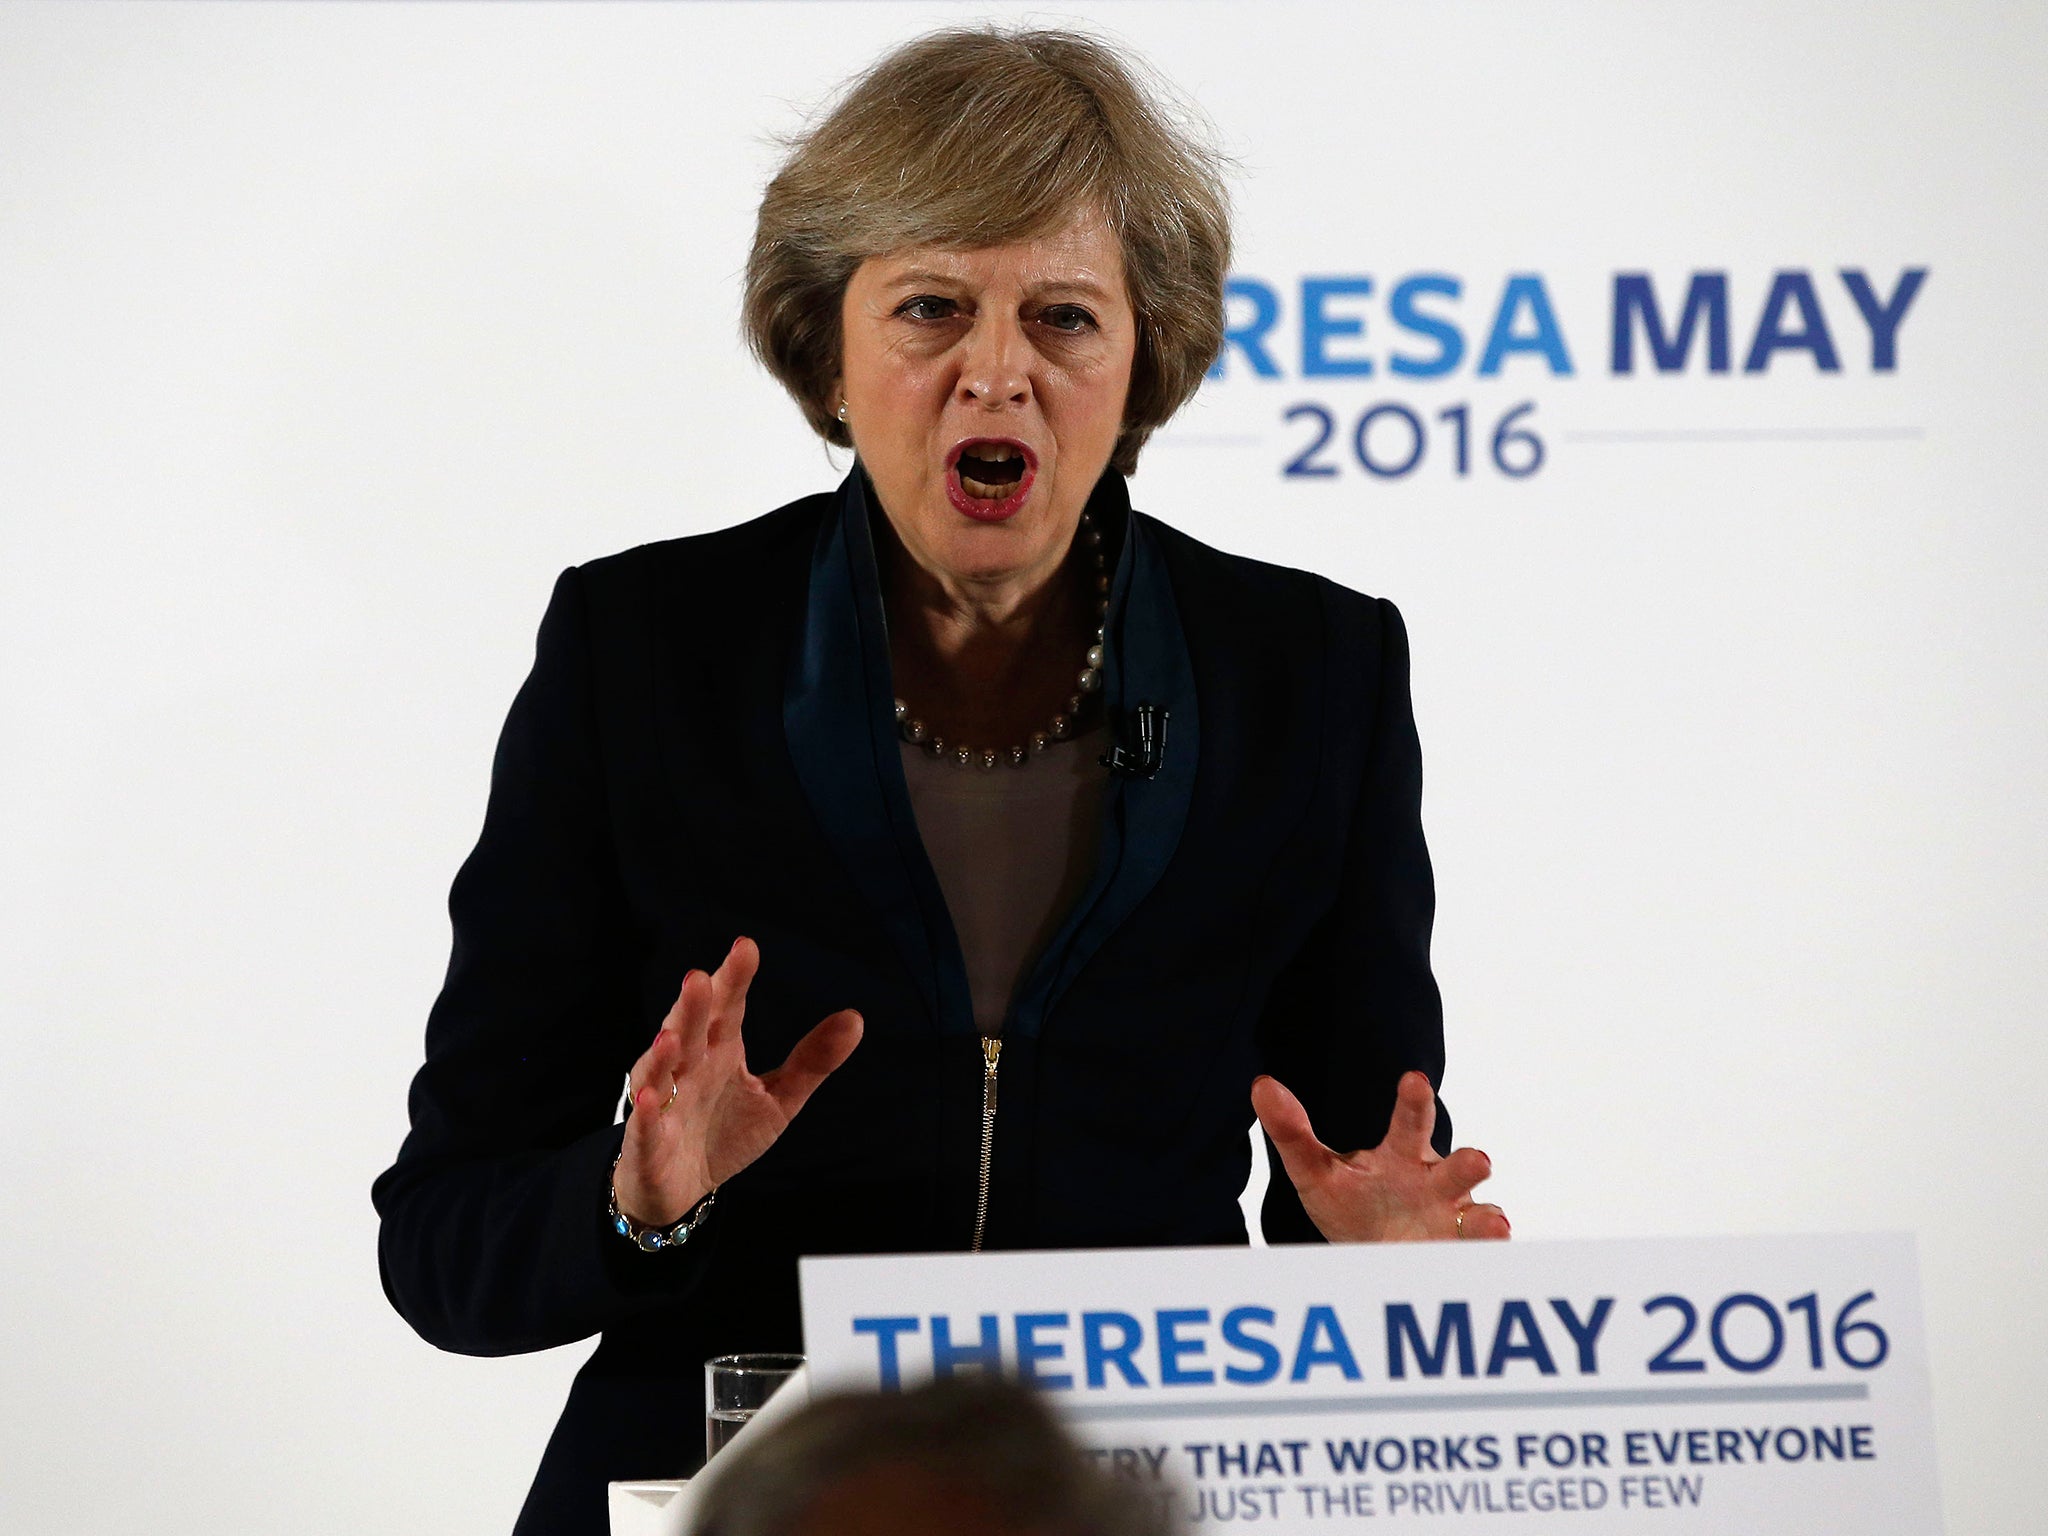 Theresa May will become Britain's next Prime Minister on Wednesday